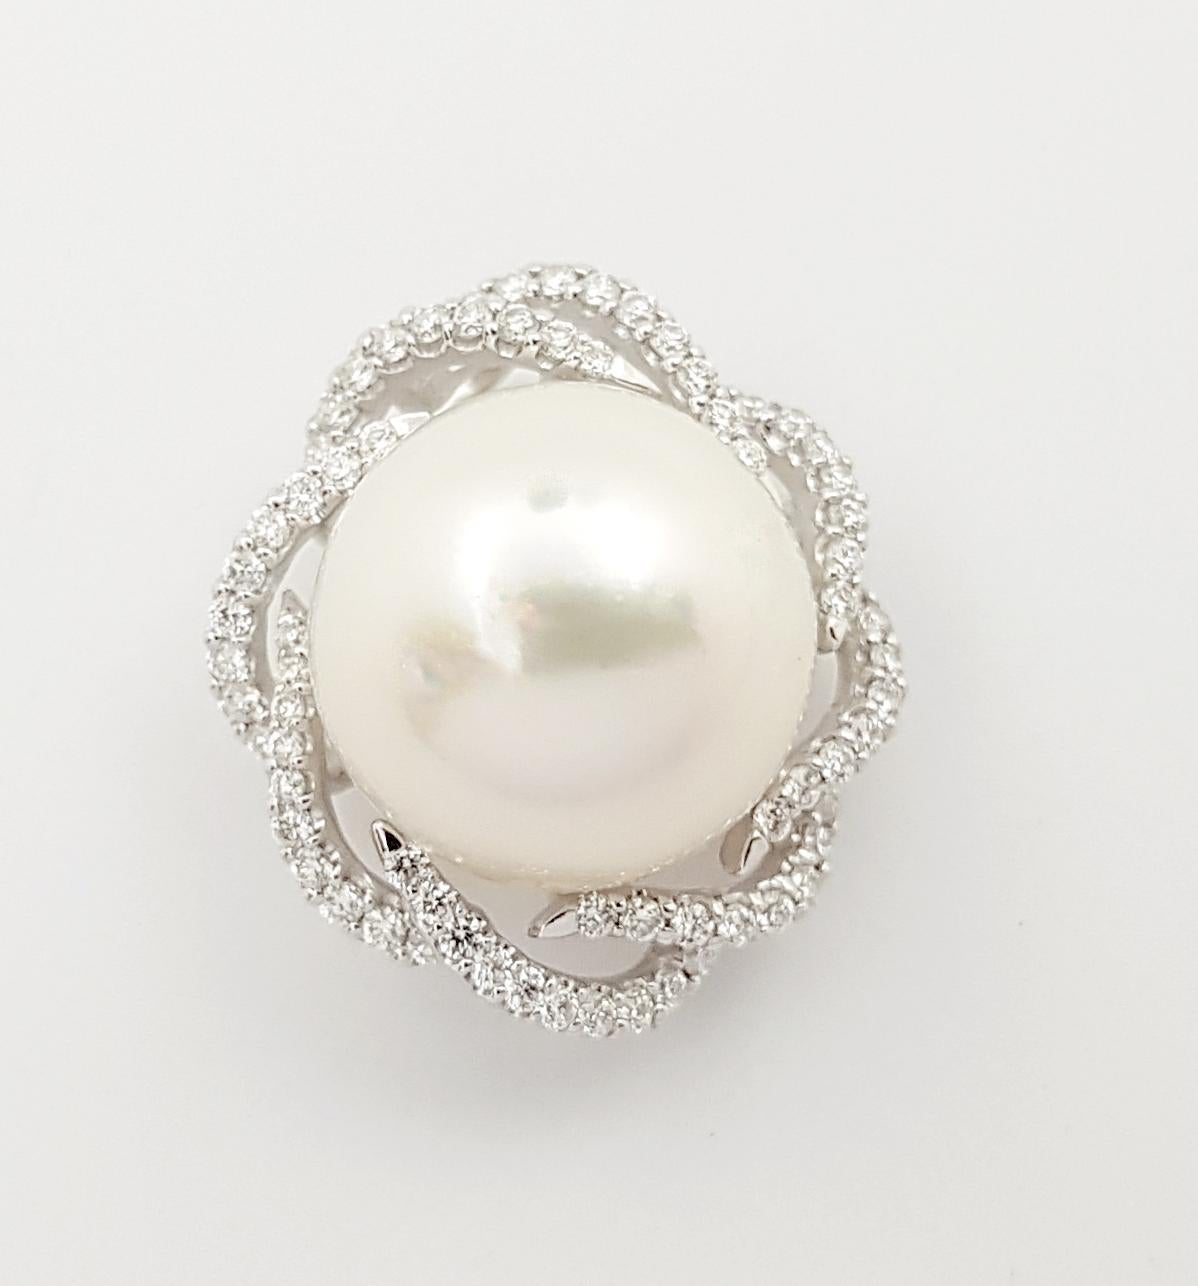 South Sea Pearl with Diamond 0.50 carat Pendant set in 18K White Gold Settings
(chain not included)

Width: 2.0 cm 
Length: 2.0 cm
Total Weight: 6.4 grams

South Sea Pearl Approximately: 14 mm

